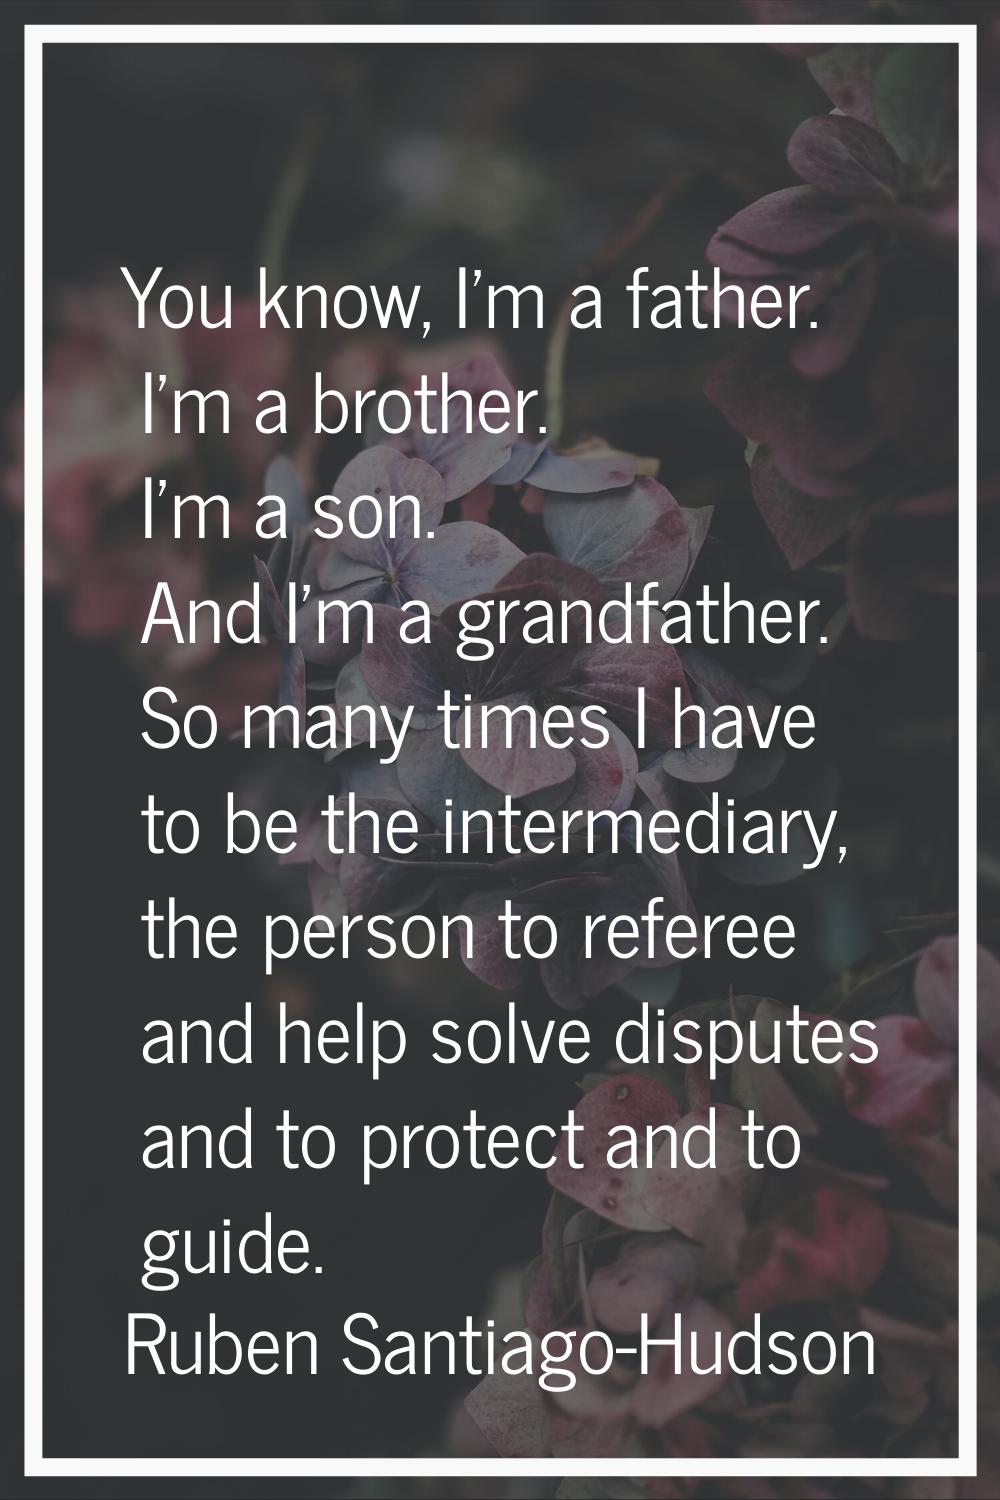 You know, I'm a father. I'm a brother. I'm a son. And I'm a grandfather. So many times I have to be